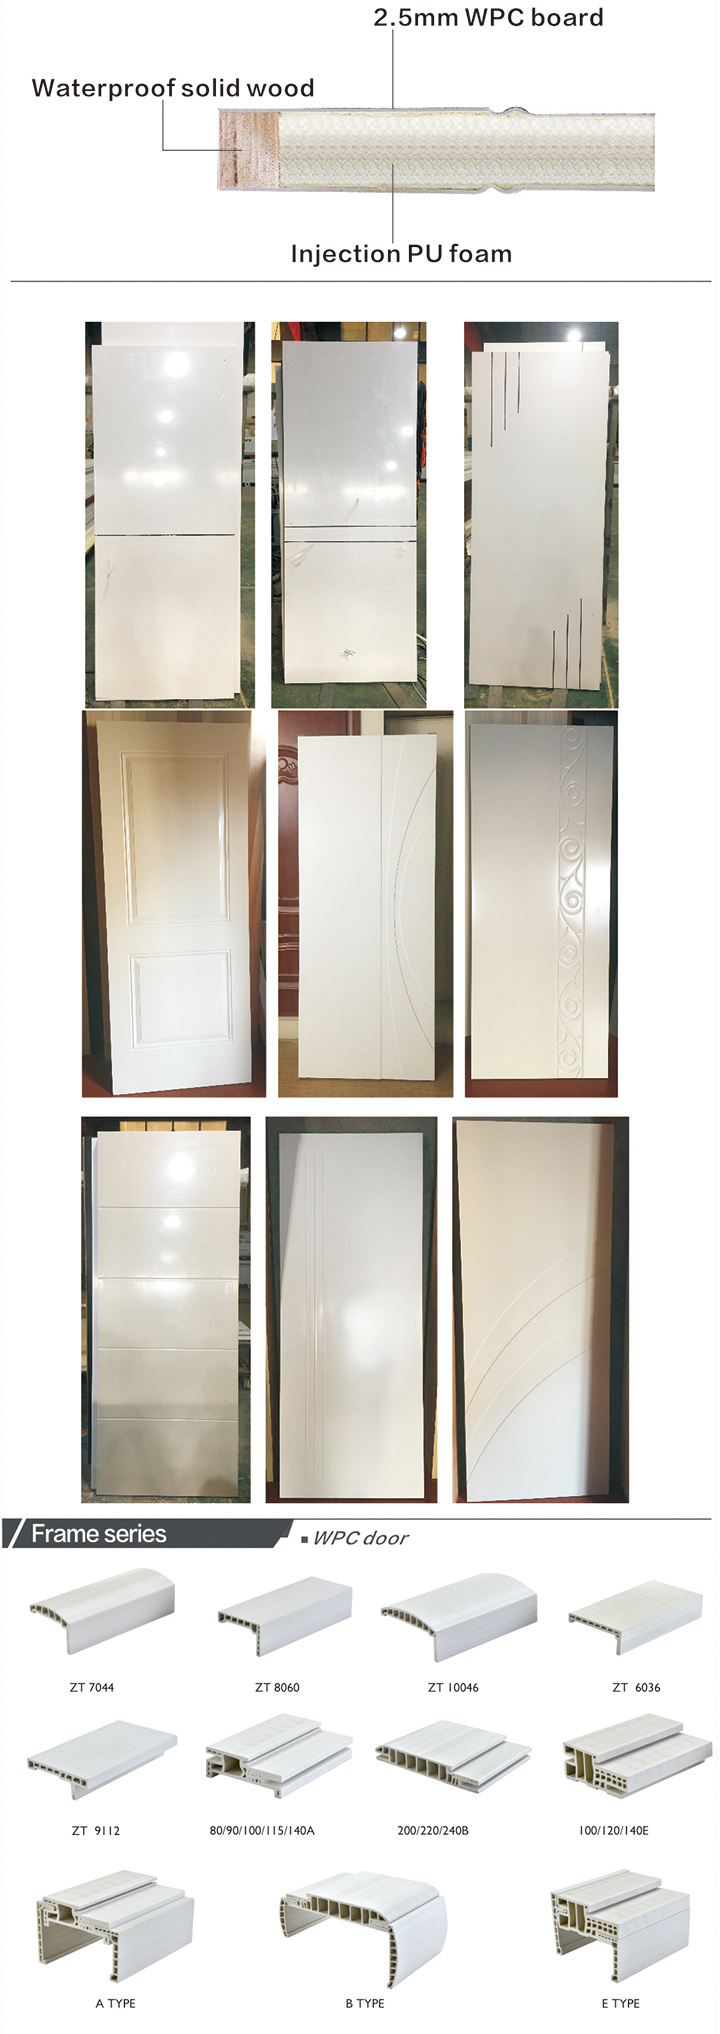 Hotsale Israel WPC White Painting Door with Glass